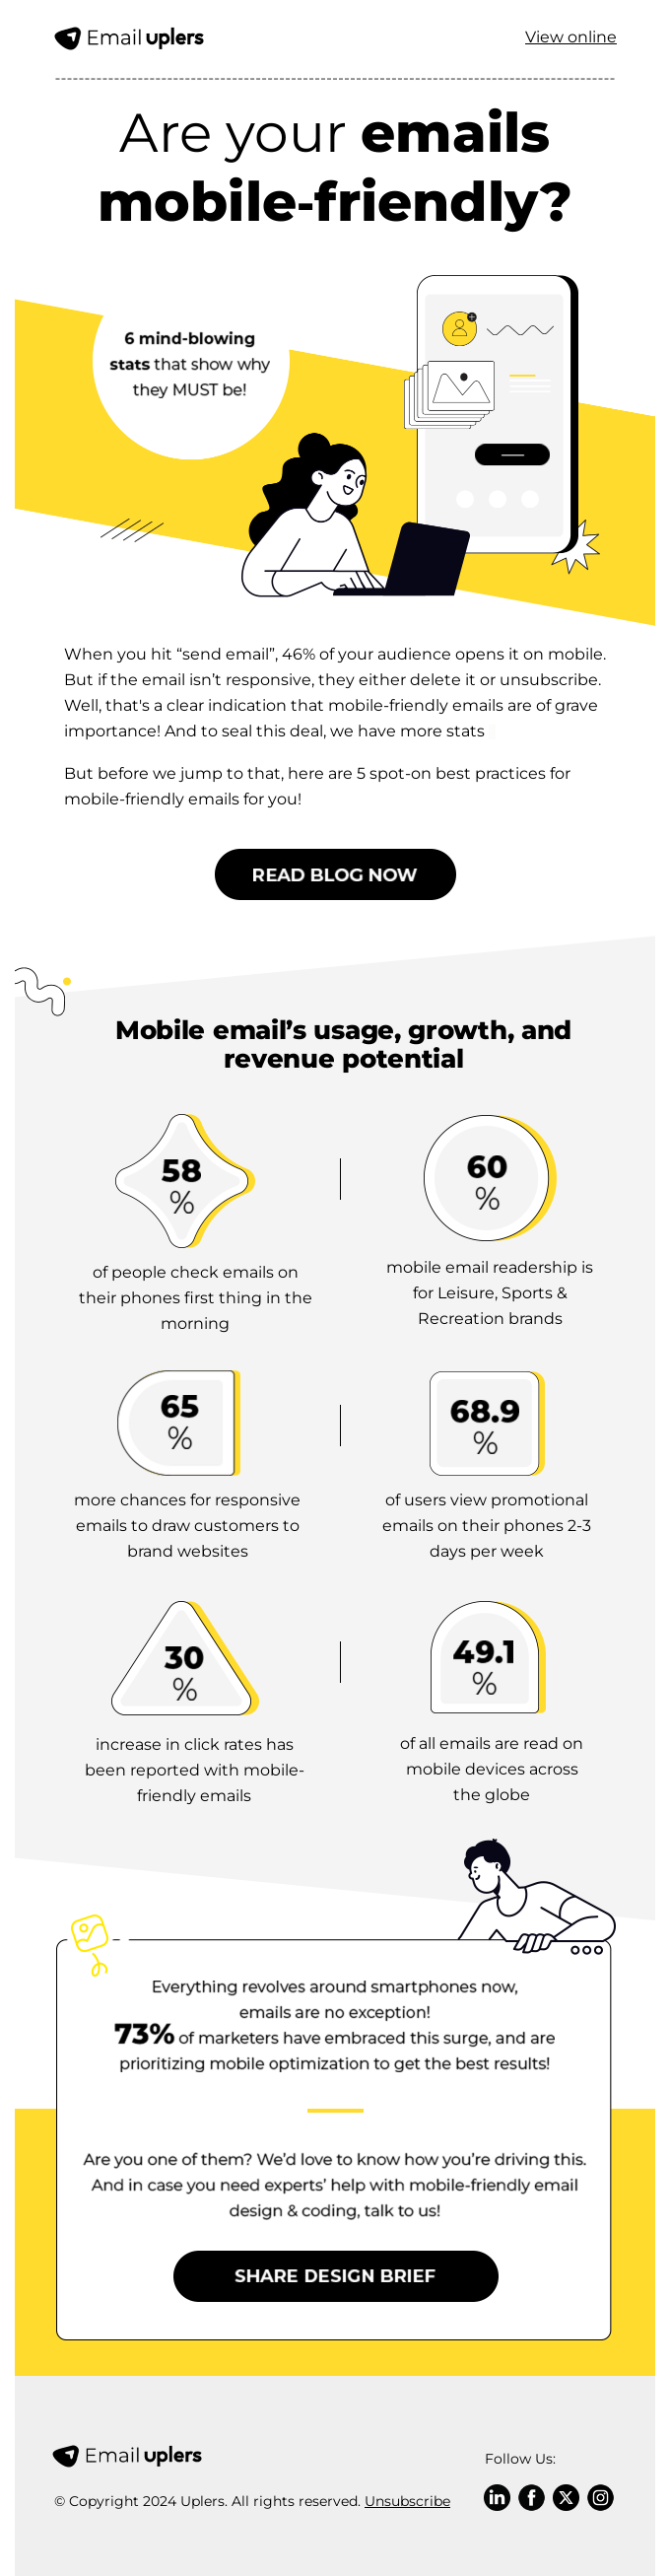 52% of your users will NOT engage if your emails aren’t mobile-friendly ❌